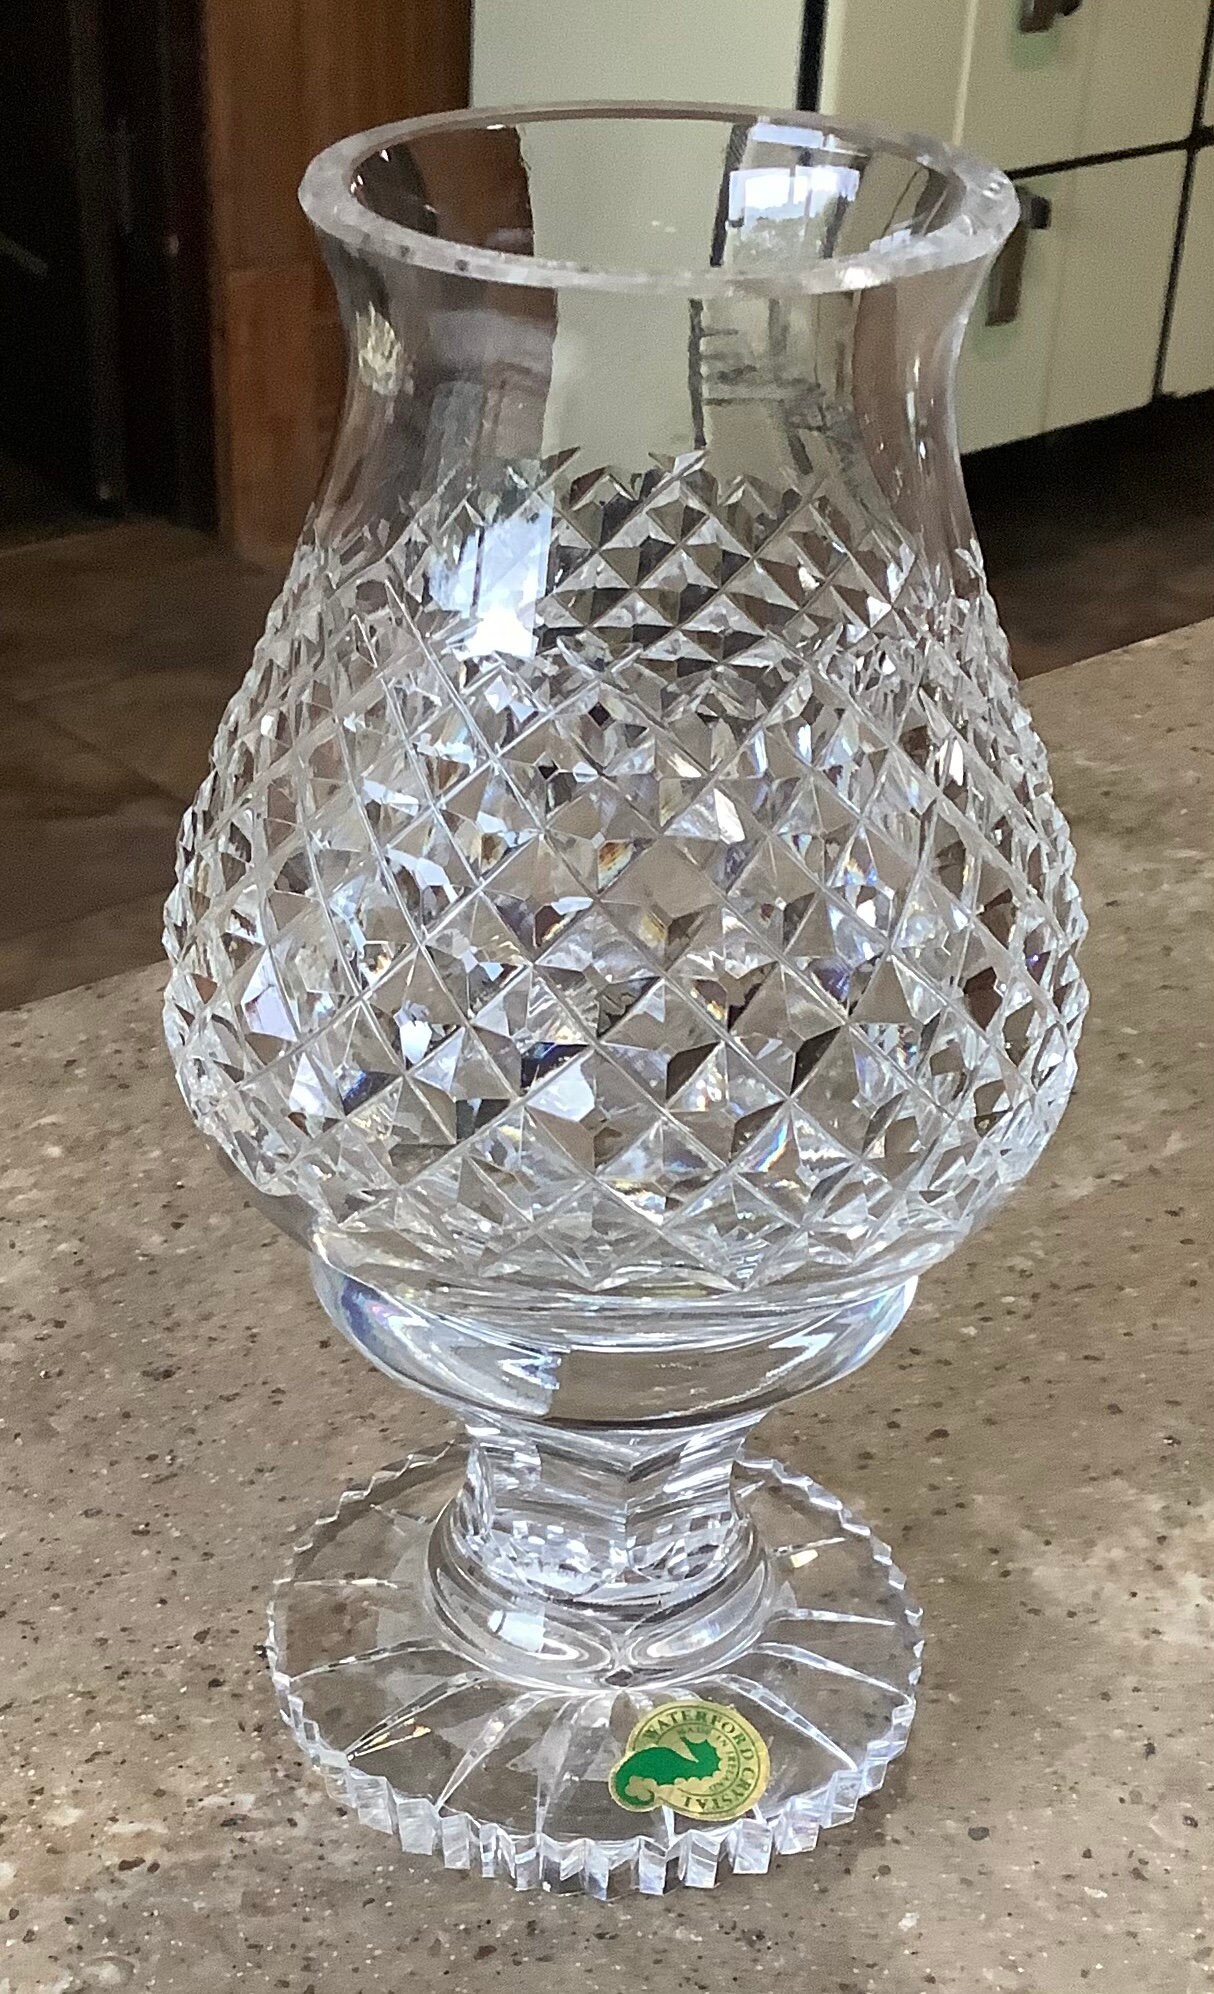 Hurricanes (2 Piece) Electric Hurricane Lamp by Waterford Crystal